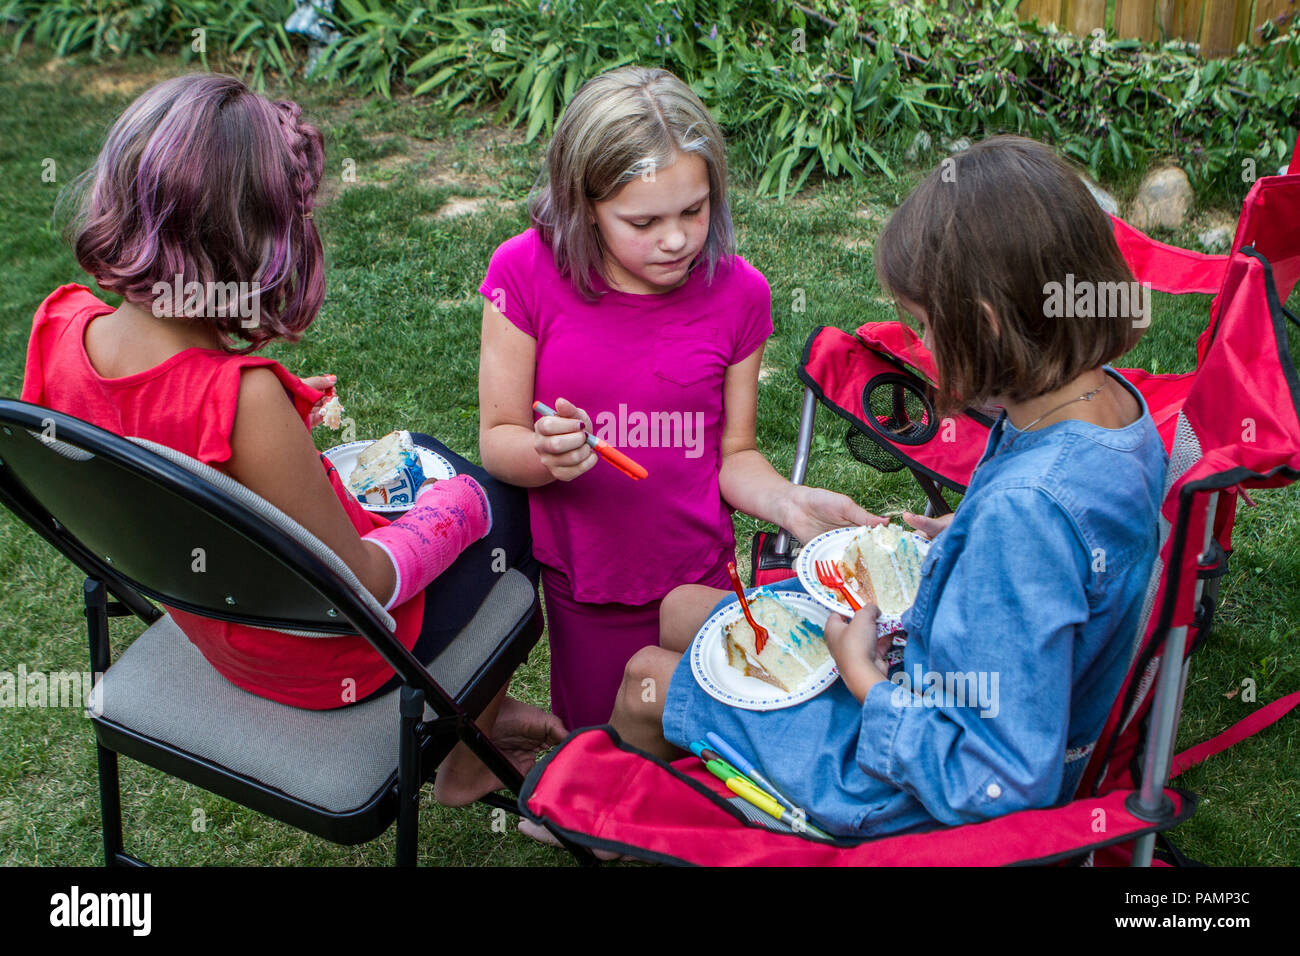 Three young females, two sisters and a cousin, sitting in backyard, on summer day, enjoying birthday cake and talking. Red Top #114, Blue Top #104, Ma Stock Photo